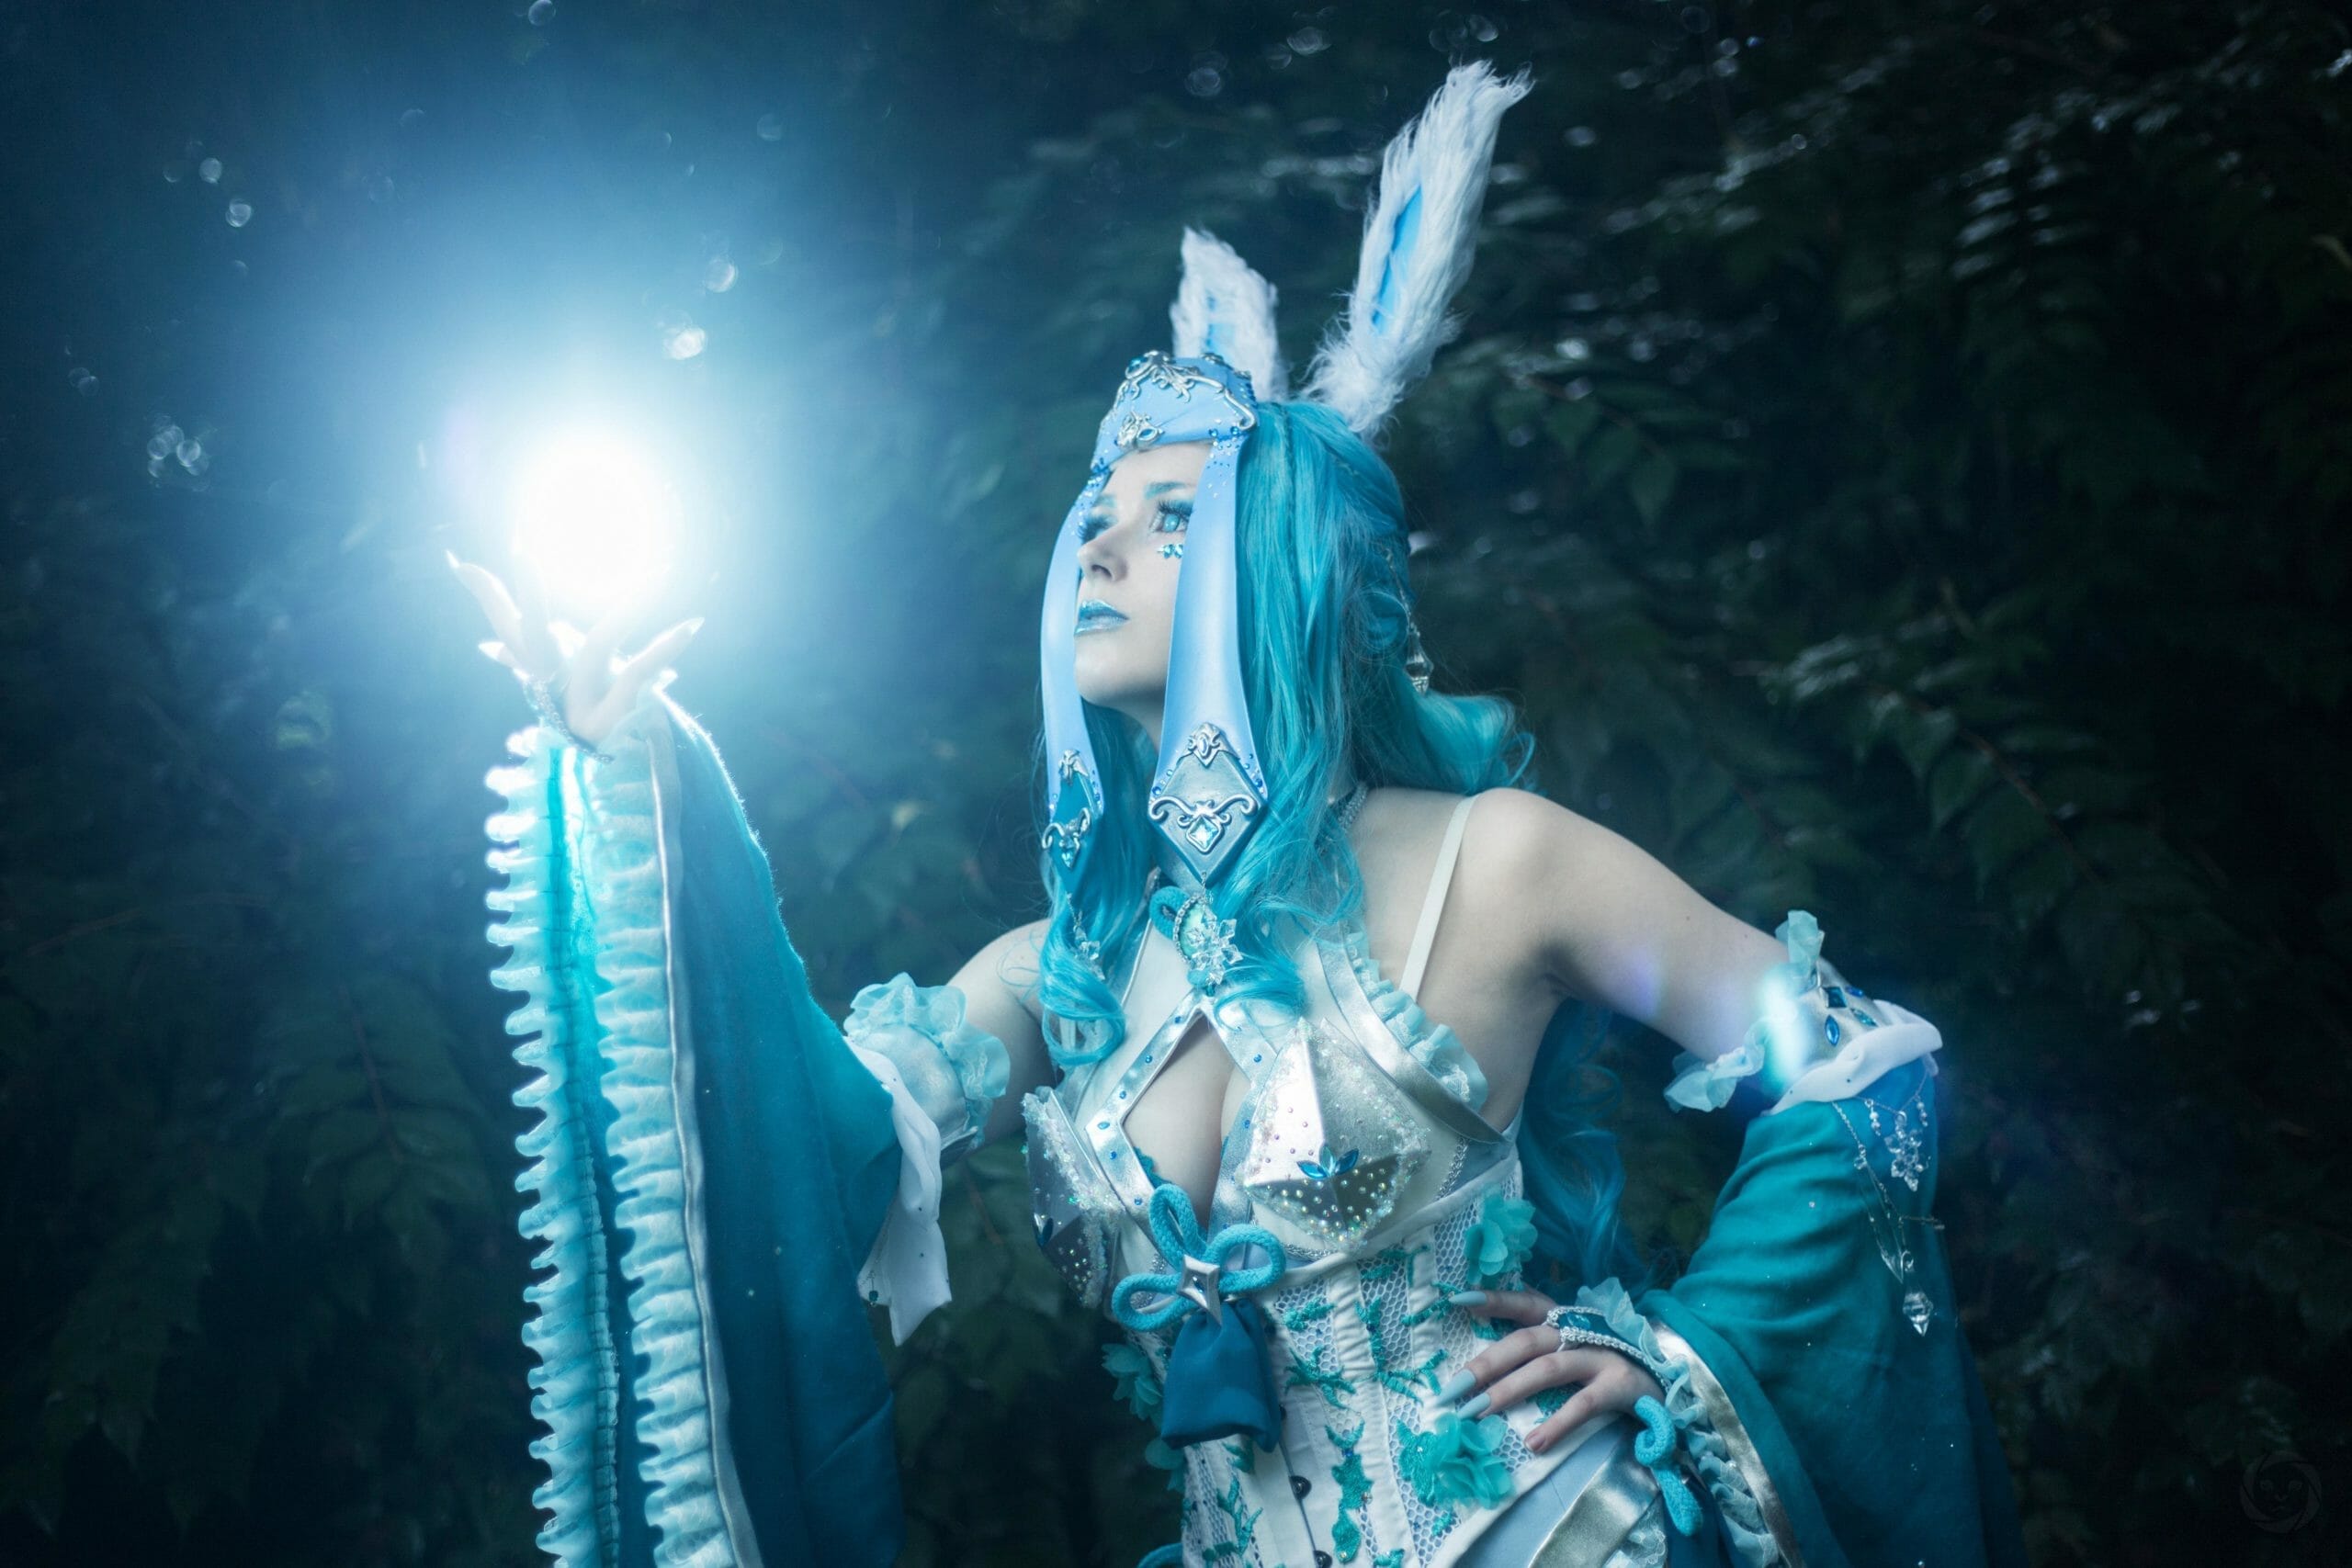 Glaceon by paiclyacosplay